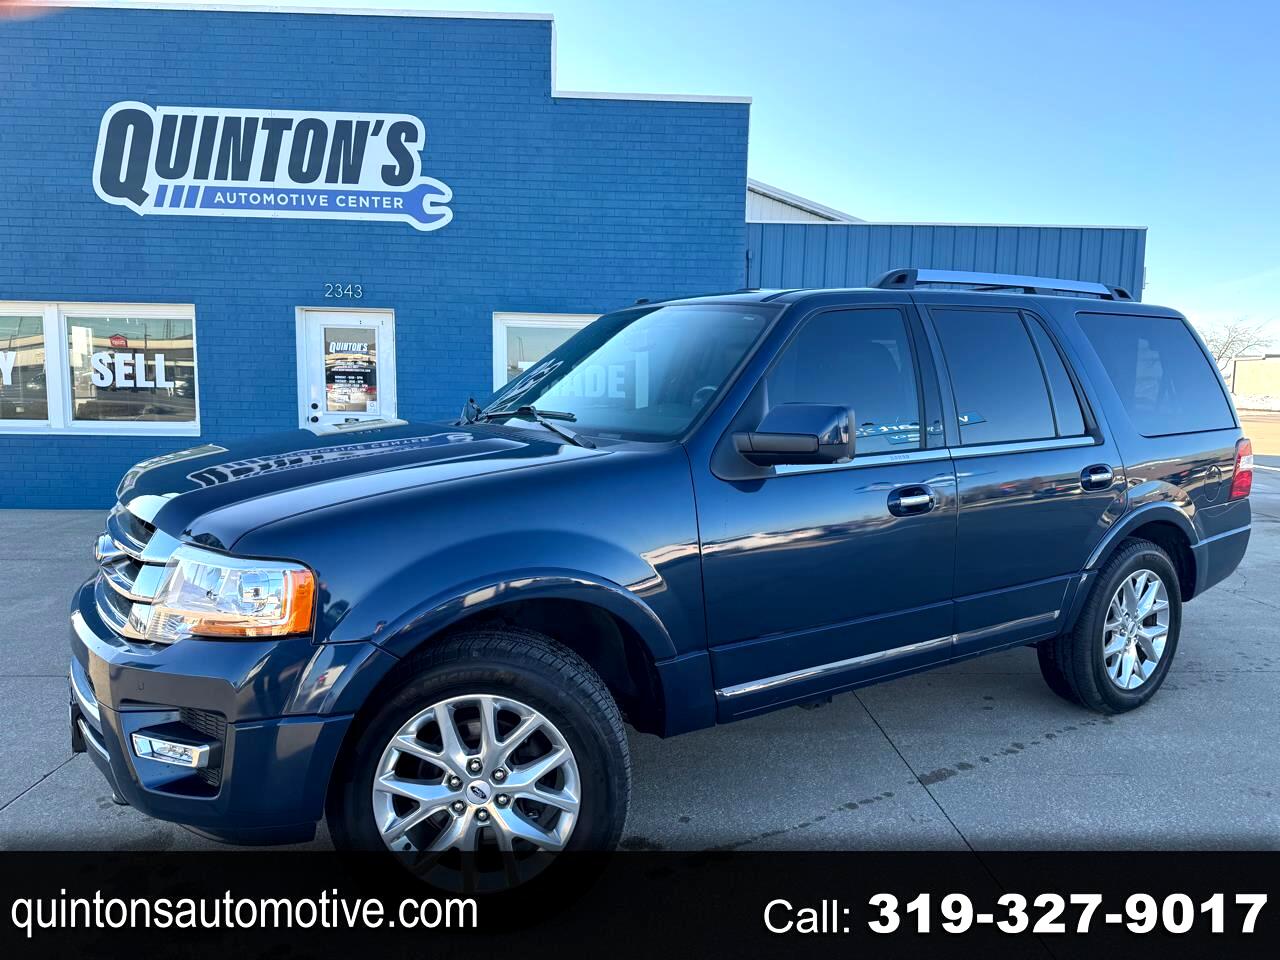 2016 Ford Expedition Independence IA